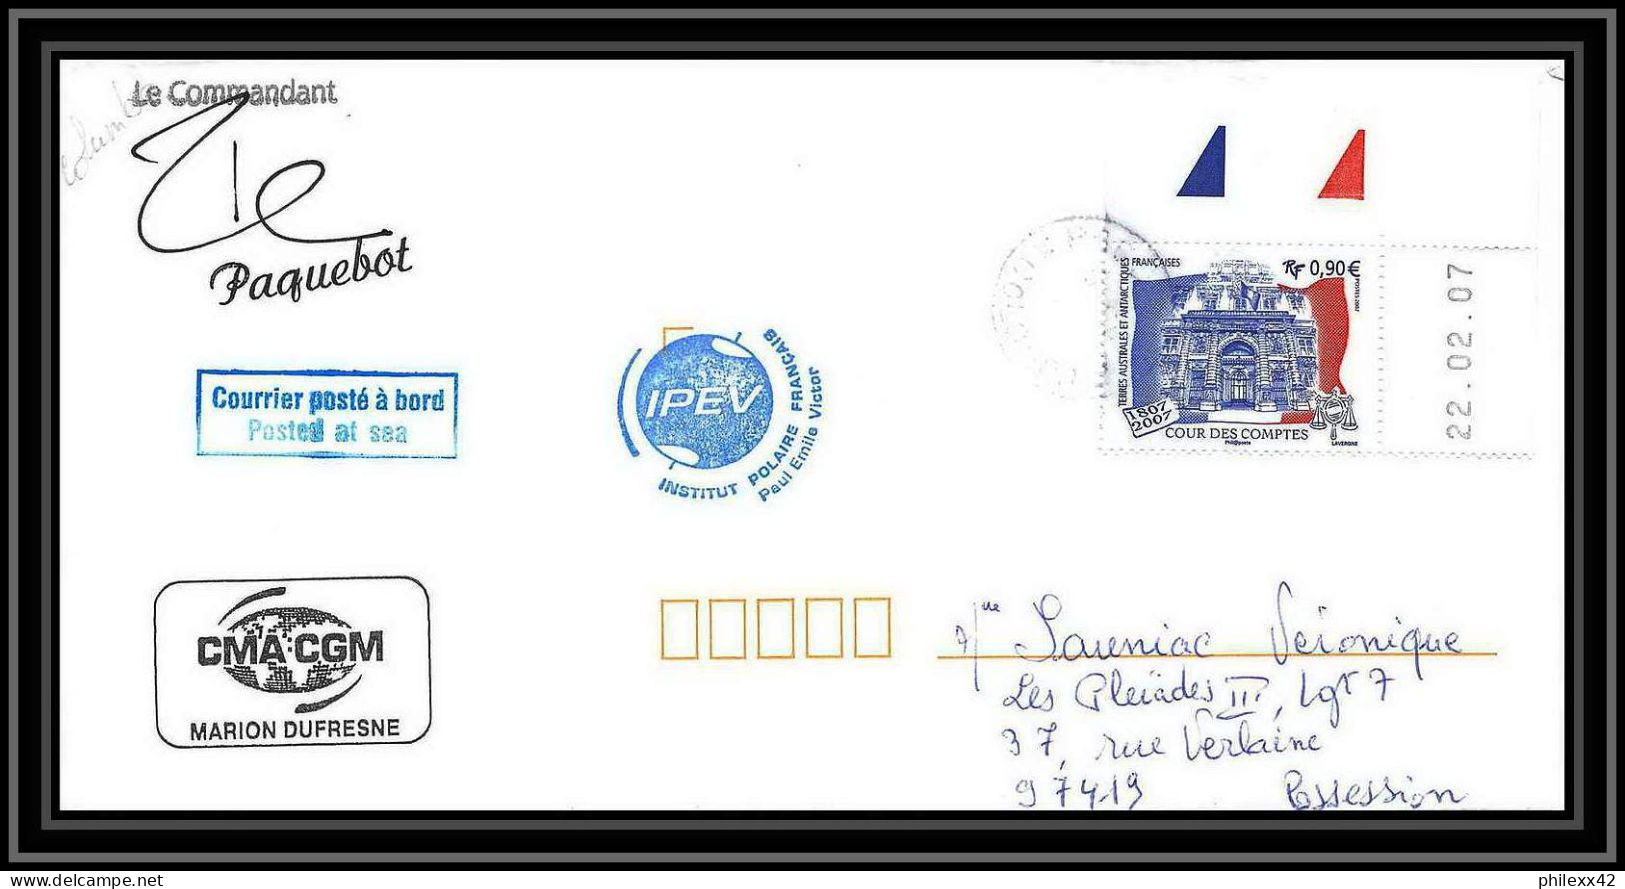 2693 ANTARCTIC Terres Australes TAAF Lettre Cover Dufresne 2 Signé Signed IPEV Colombo 1/6/2007 N°471 Coin Daté - Expediciones Antárticas